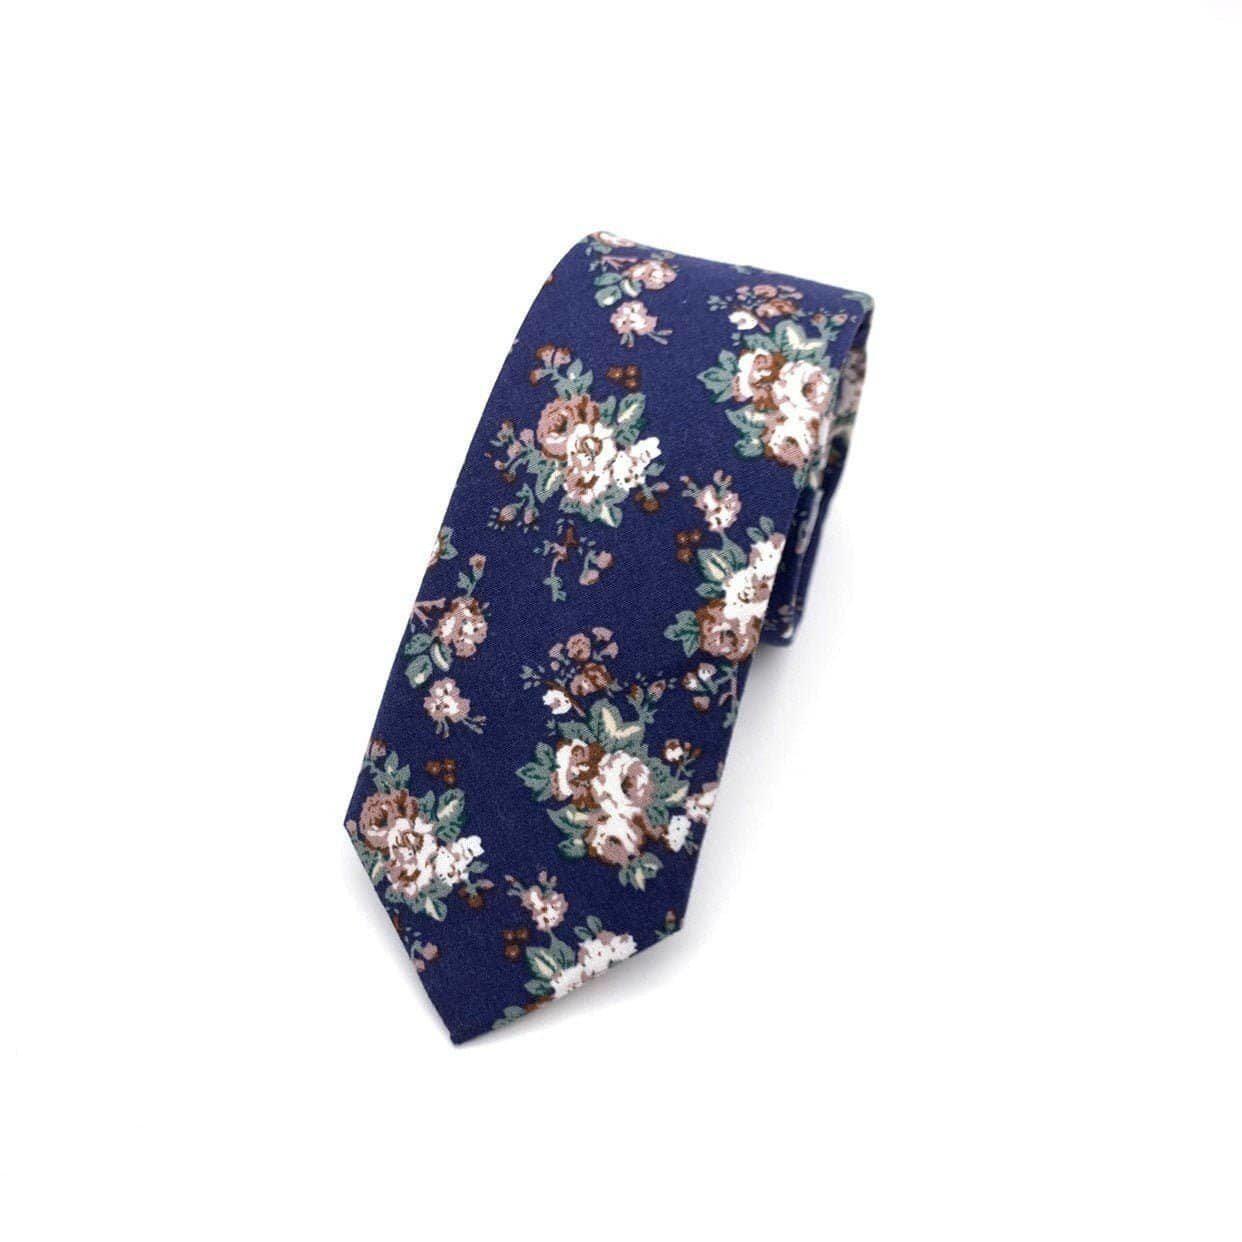 NAVY Floral Tie 2.36&quot; LAKE - MYTIESHOP-Neckties-Navy Floral Skinny Tie Men’s Floral Necktie for weddings events, great for prom anniversary gifts. Groom groomsmen father of bride blue floral tie-Mytieshop. Skinny ties for weddings anniversaries. Father of bride. Groomsmen. Cool skinny neckties for men. Neckwear for prom, missions and fancy events. Gift ideas for men. Anniversaries ideas. Wedding aesthetics. Flower ties. Dry flower ties.